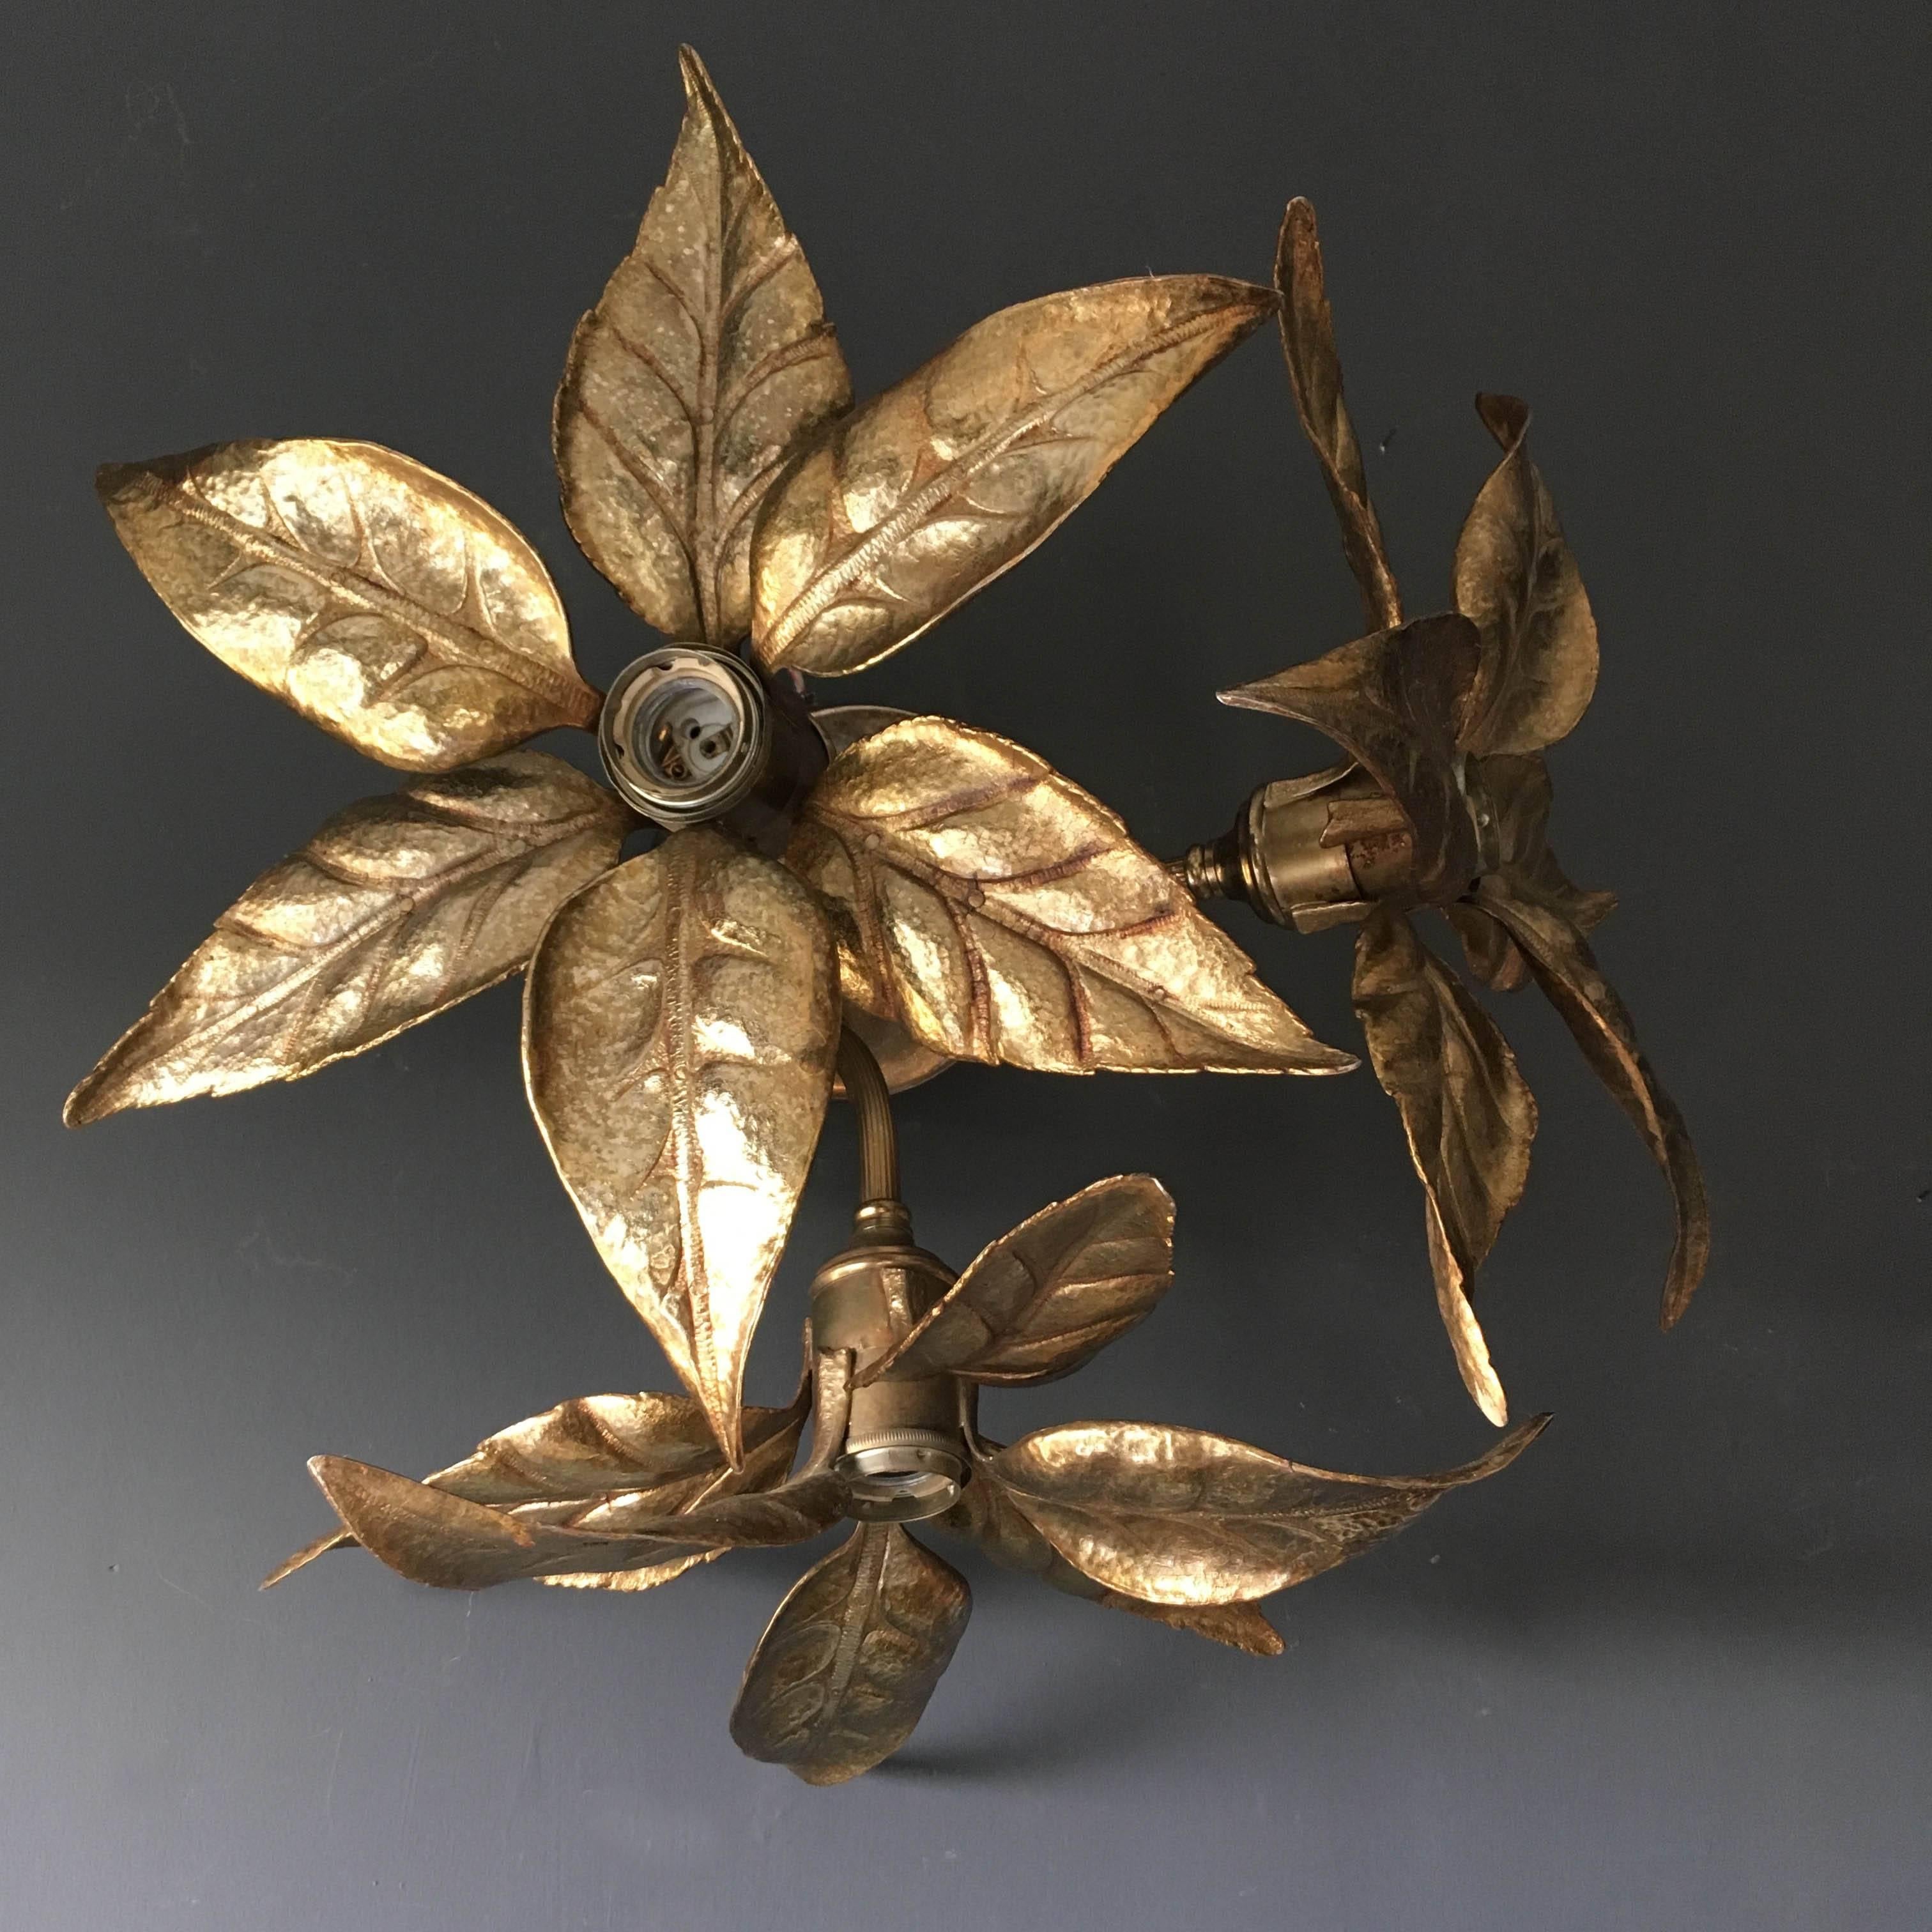 Beautiful large three-flower ceiling light by renowned designed Willy Daro for Massive lighting Co, Belgium, 1970s. 

The three textured leaf like flowers branch out from the centre pendant and hold a single bulb each. The light is solid brass and